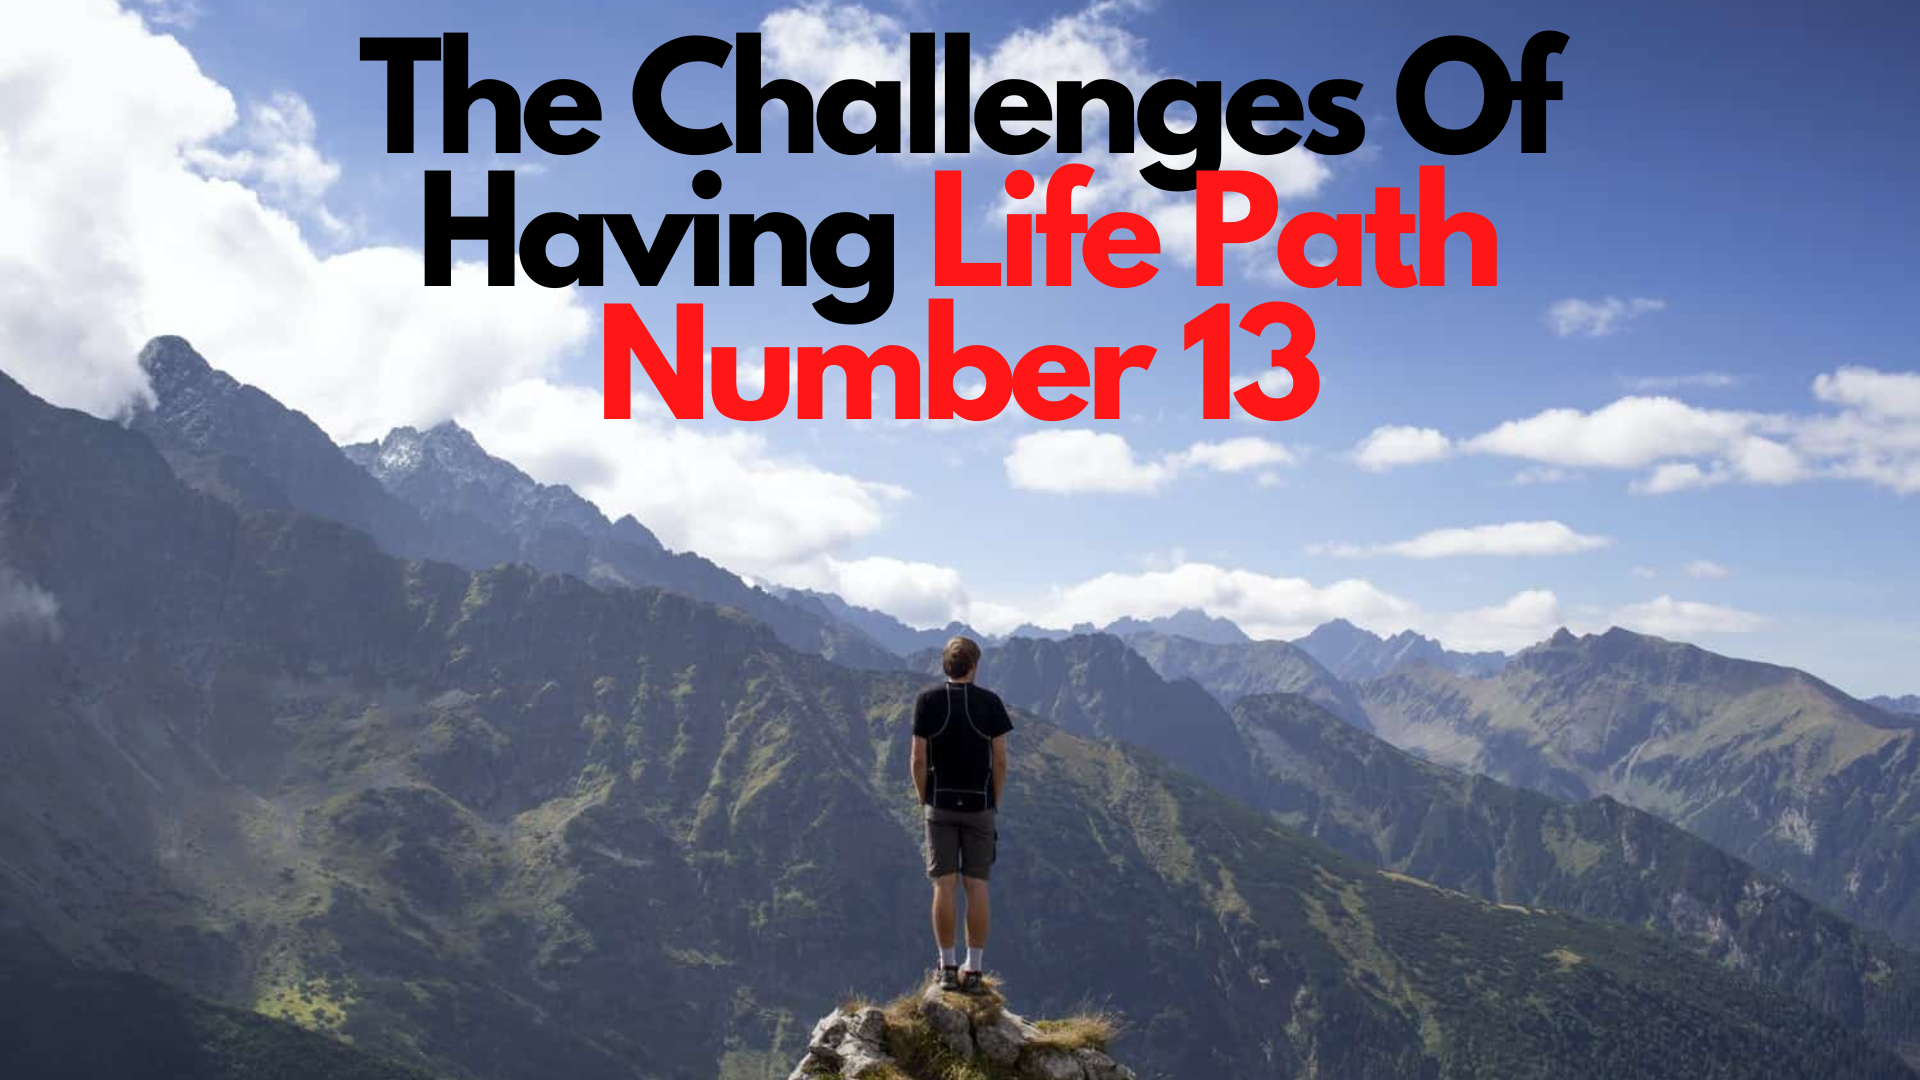 A man standing on top of the mountain with words The Challenges Of Having Life Path Number 13